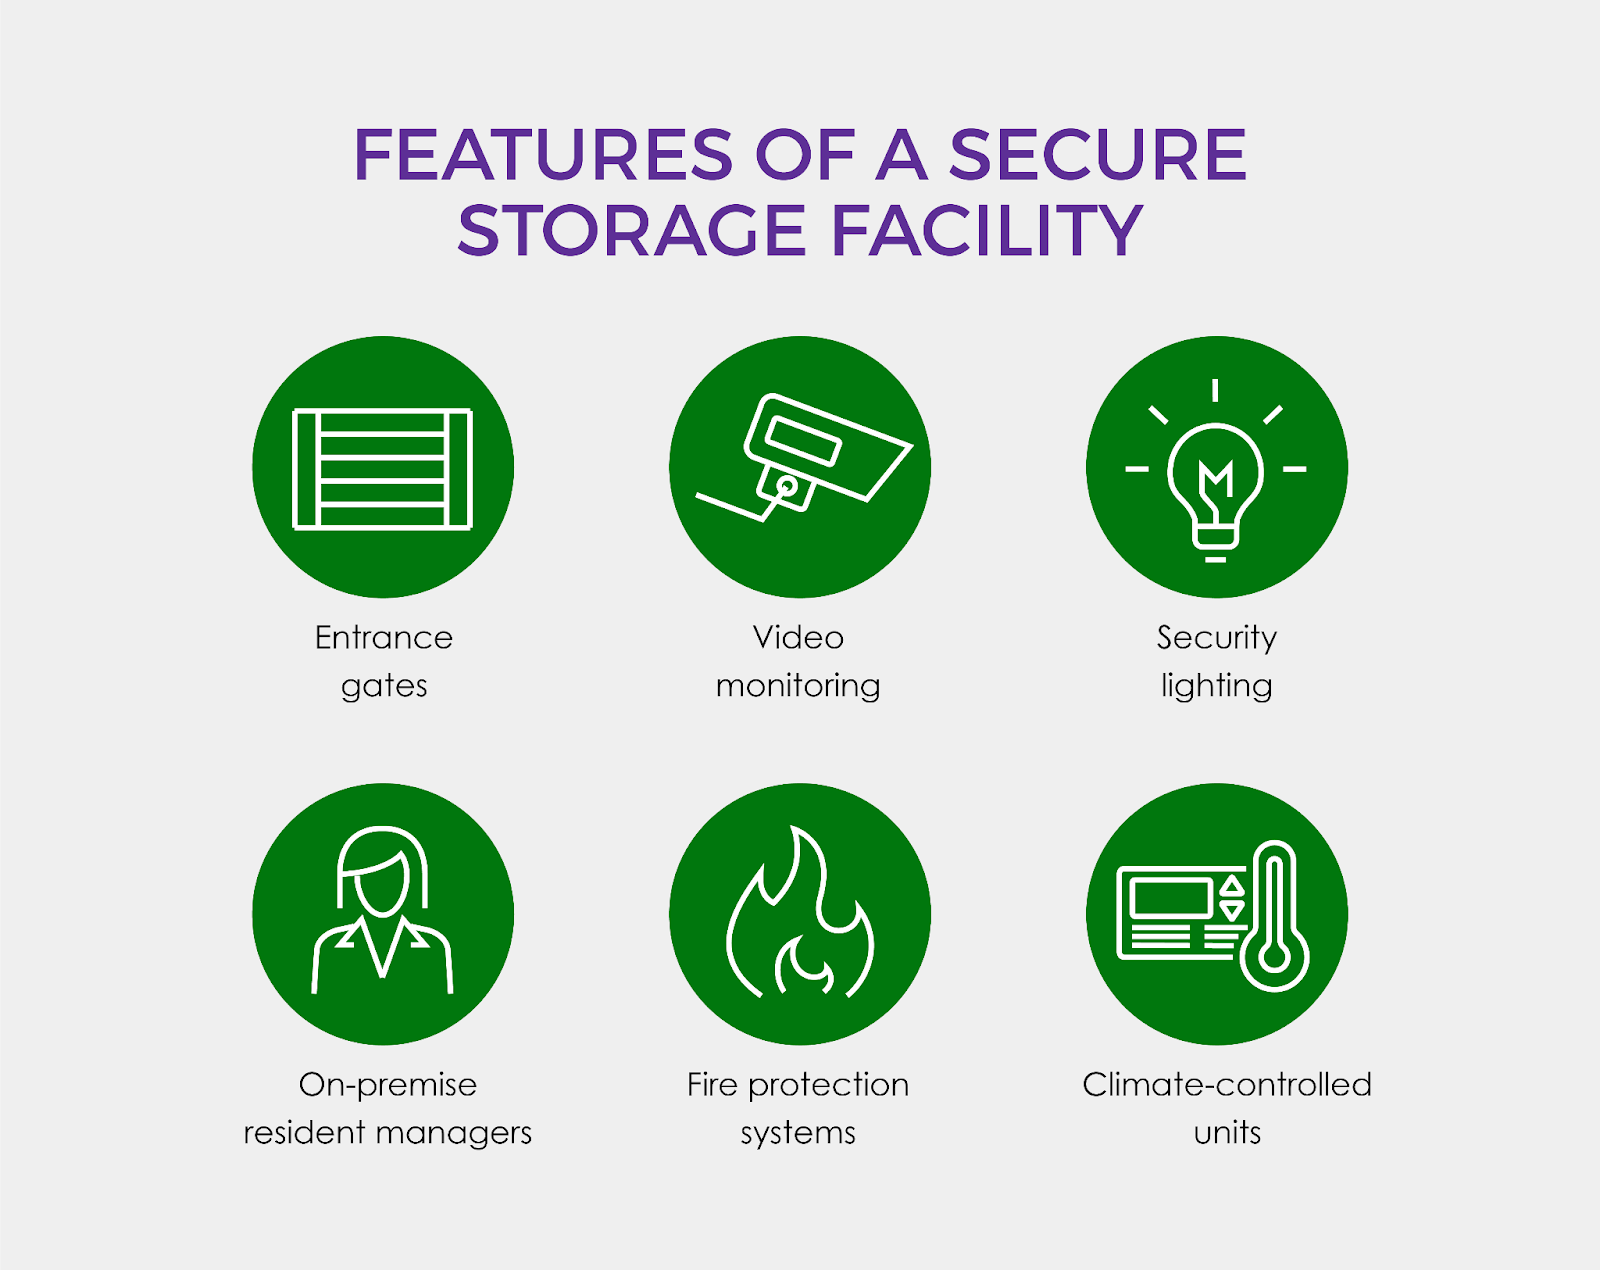 Features of a secure storage facility